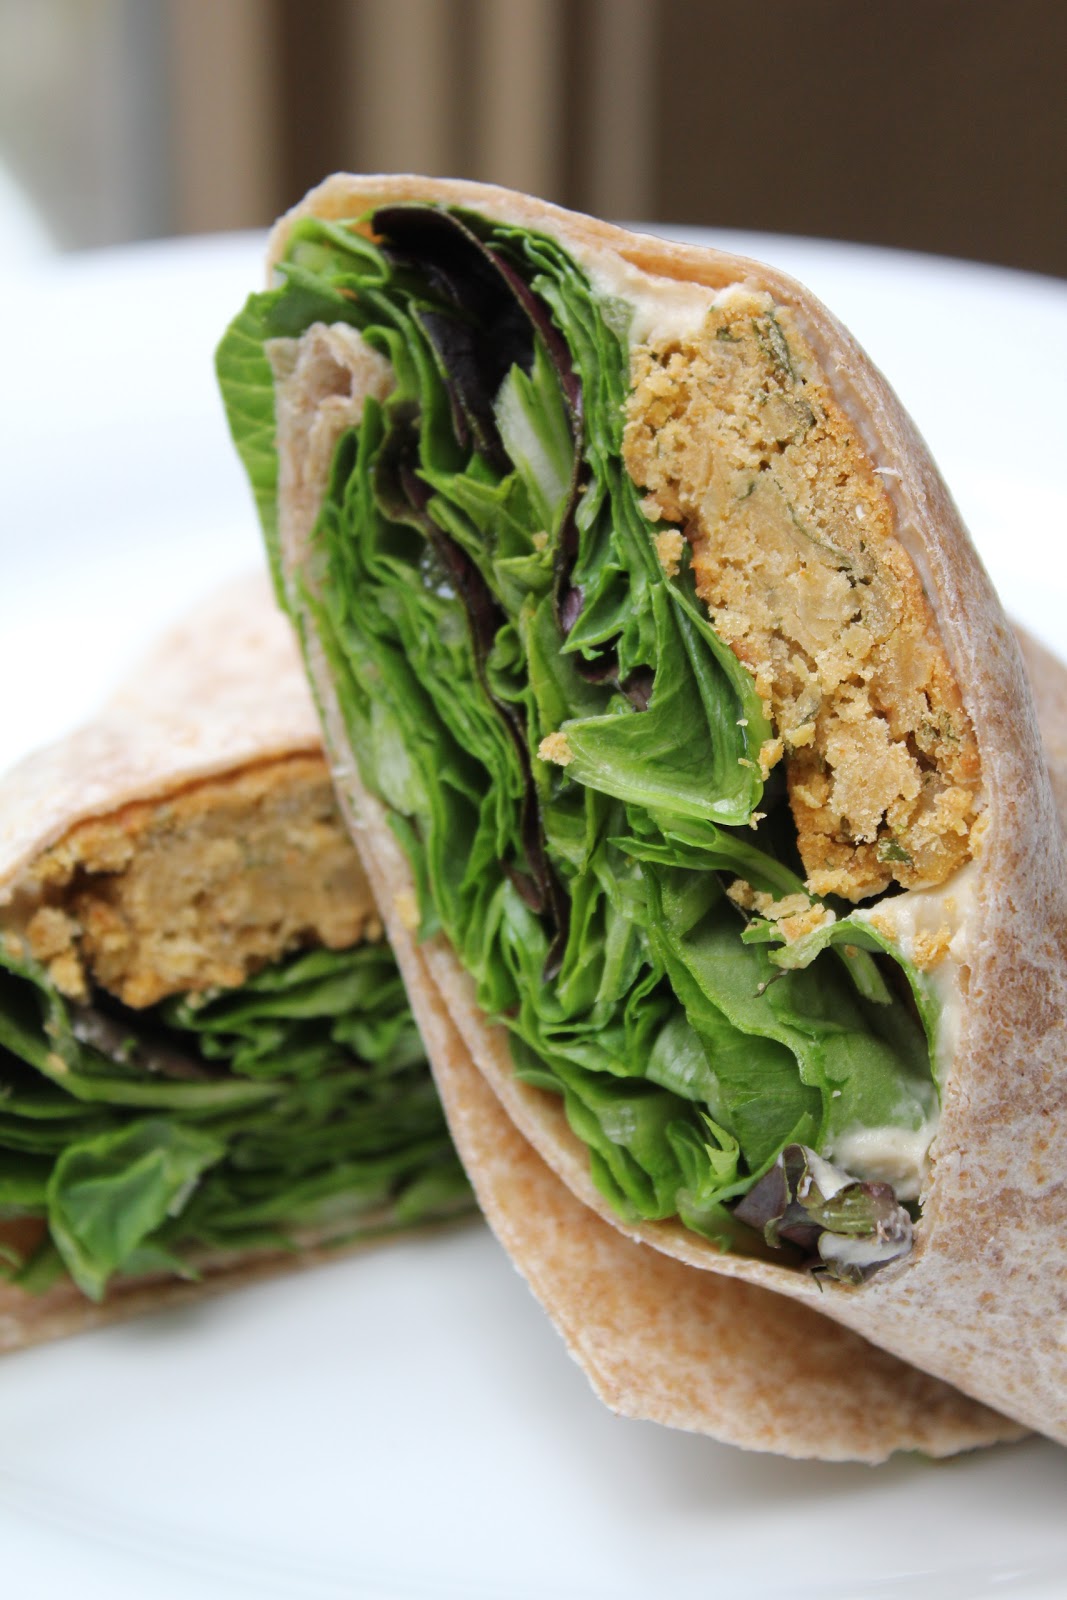 Blog Healthy: A Busy Person's Tip: Make a Wrap Out of It